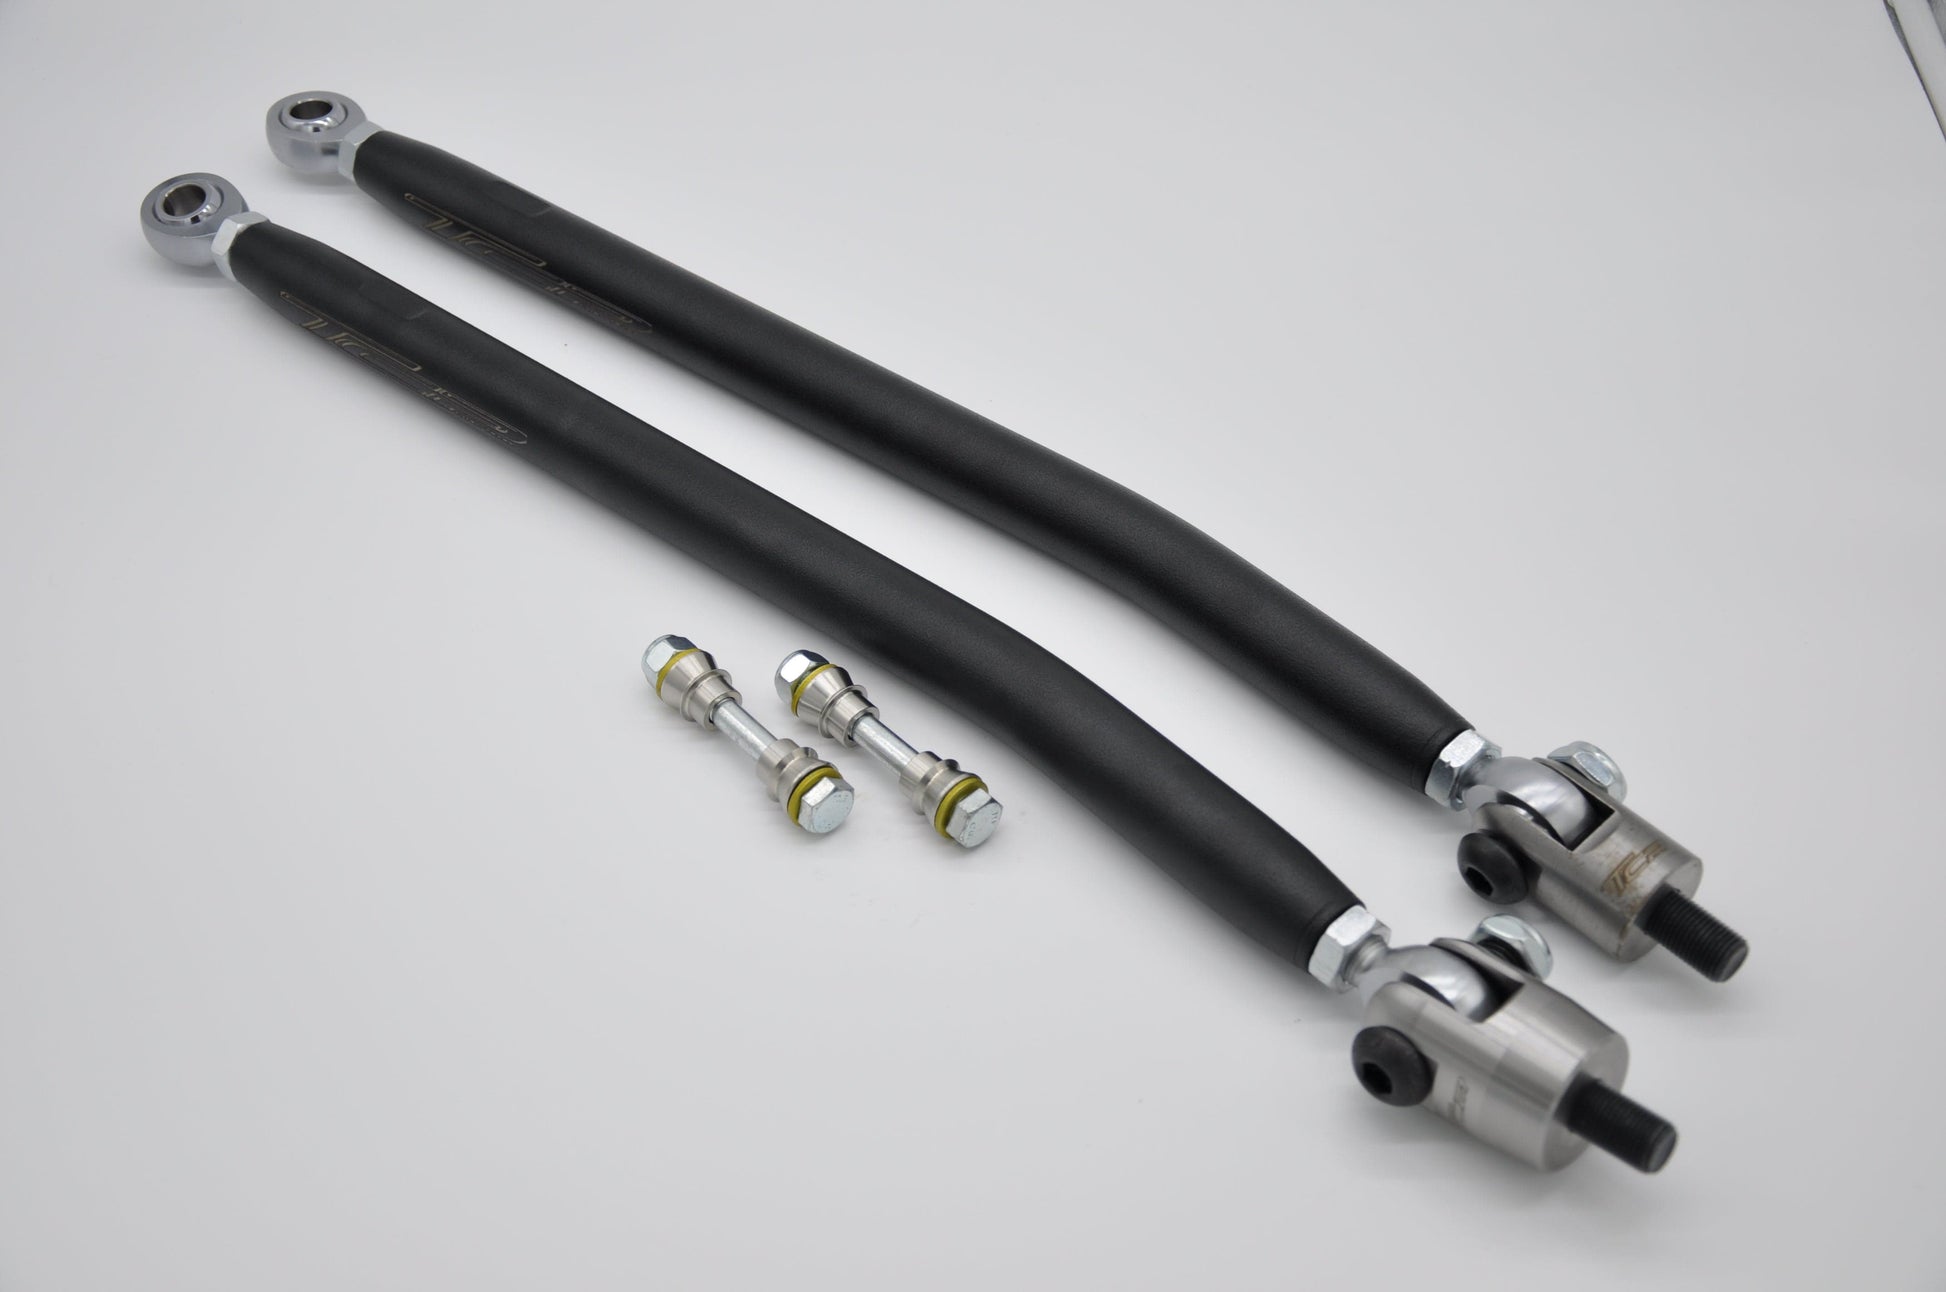 Heavy Duty Tie Rods, Rod Ends, Clevises, and Straight King Pins for Polaris Ranger 900 (OBS) with SATV +6 Lift